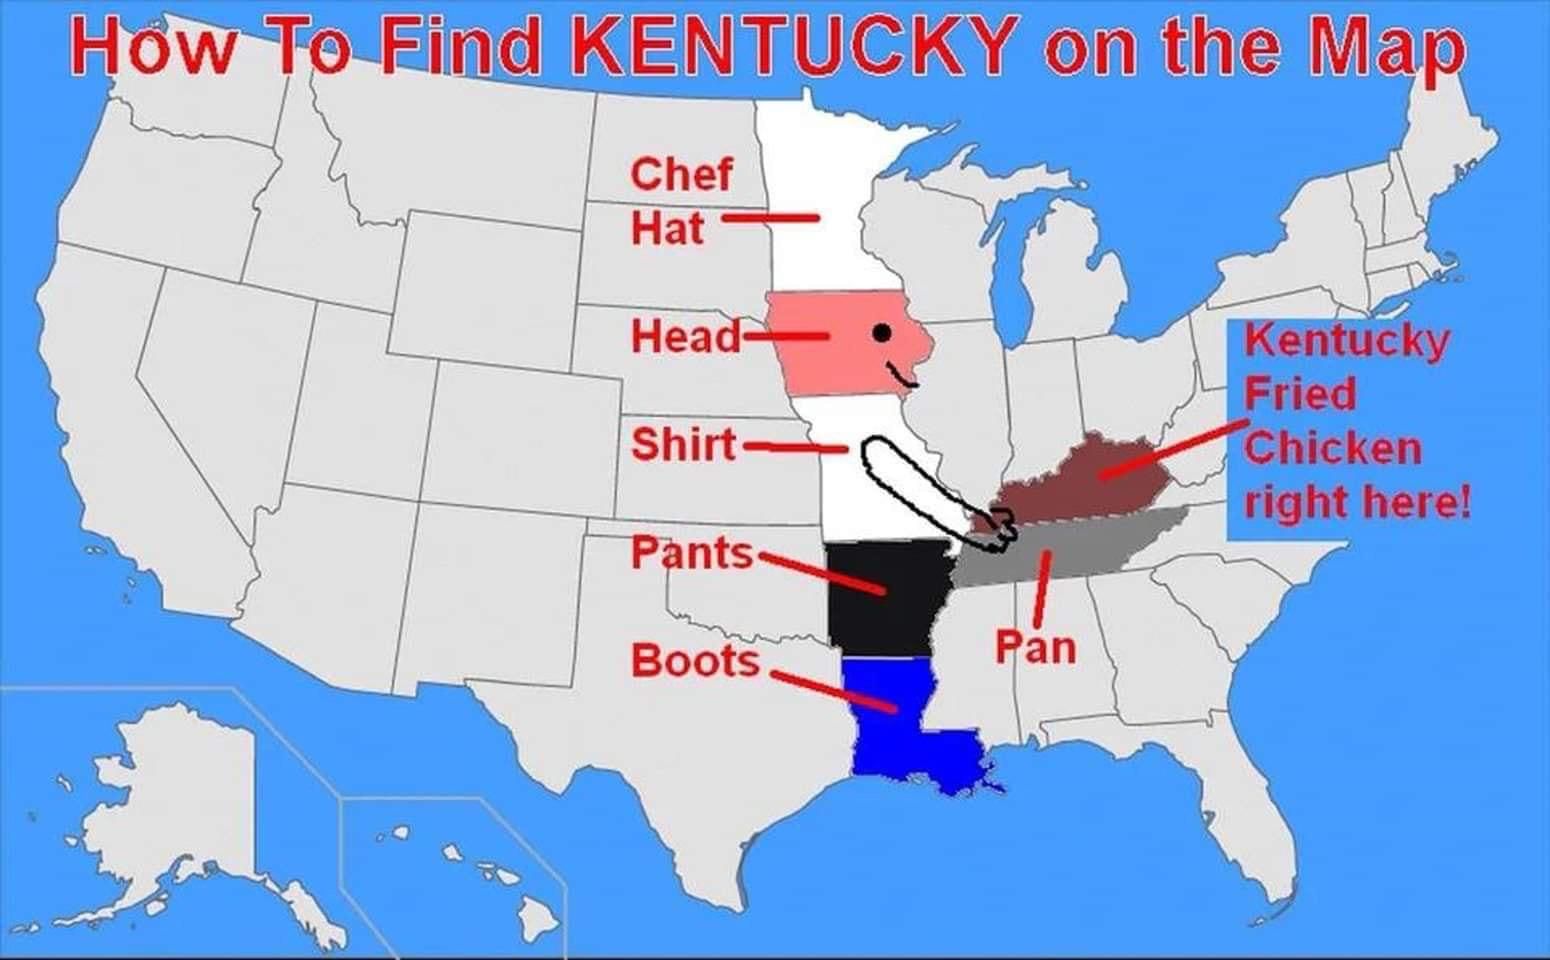 Kentucky is getting cooked.